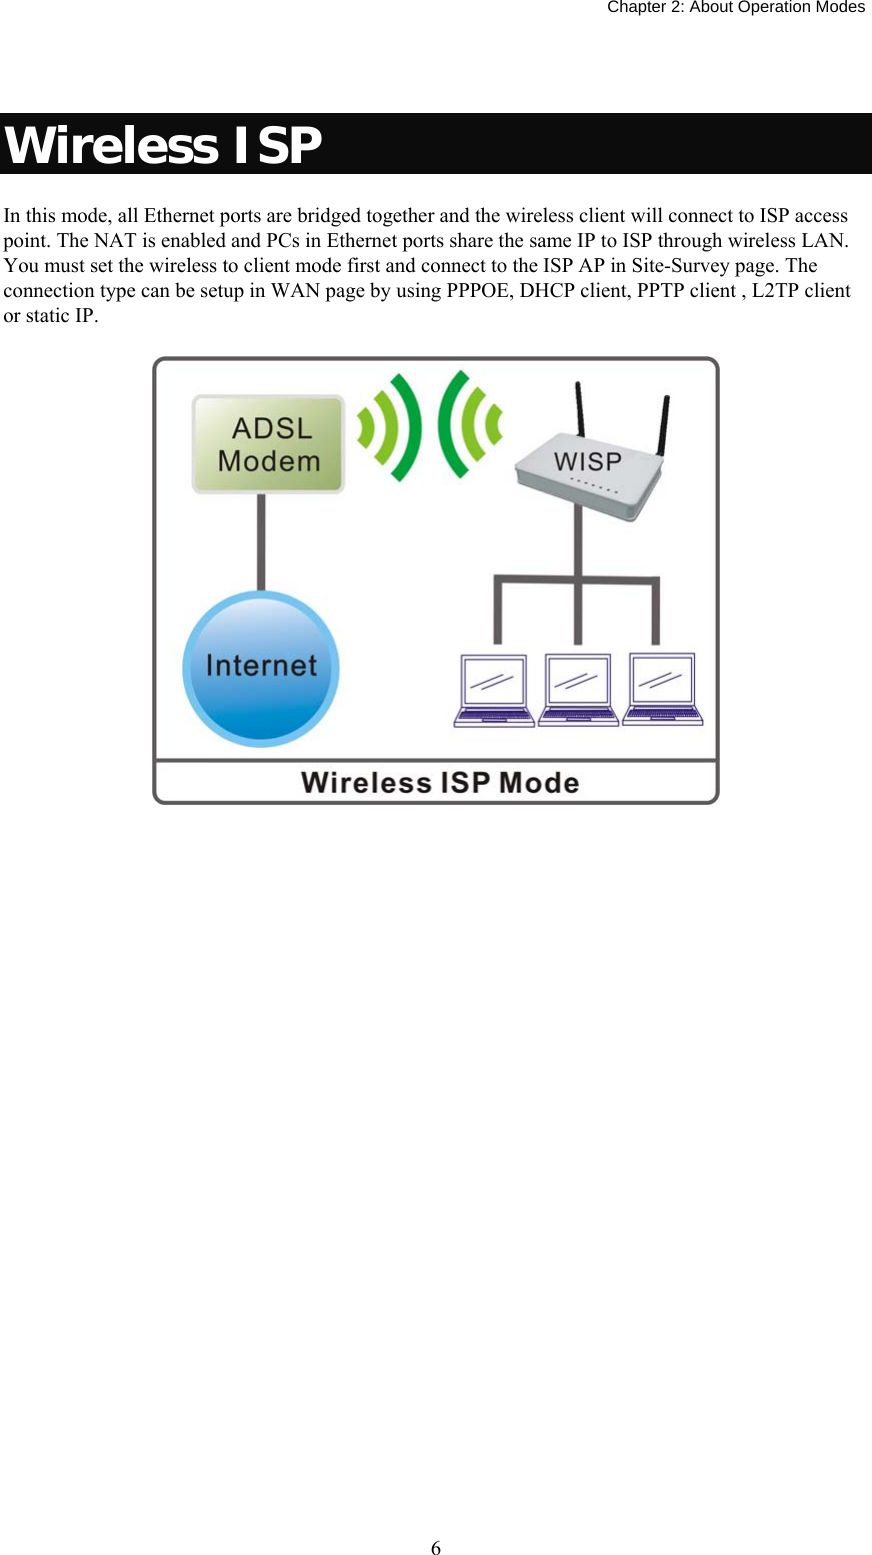   Chapter 2: About Operation Modes  6 Wireless ISP In this mode, all Ethernet ports are bridged together and the wireless client will connect to ISP access point. The NAT is enabled and PCs in Ethernet ports share the same IP to ISP through wireless LAN. You must set the wireless to client mode first and connect to the ISP AP in Site-Survey page. The connection type can be setup in WAN page by using PPPOE, DHCP client, PPTP client , L2TP client or static IP.  